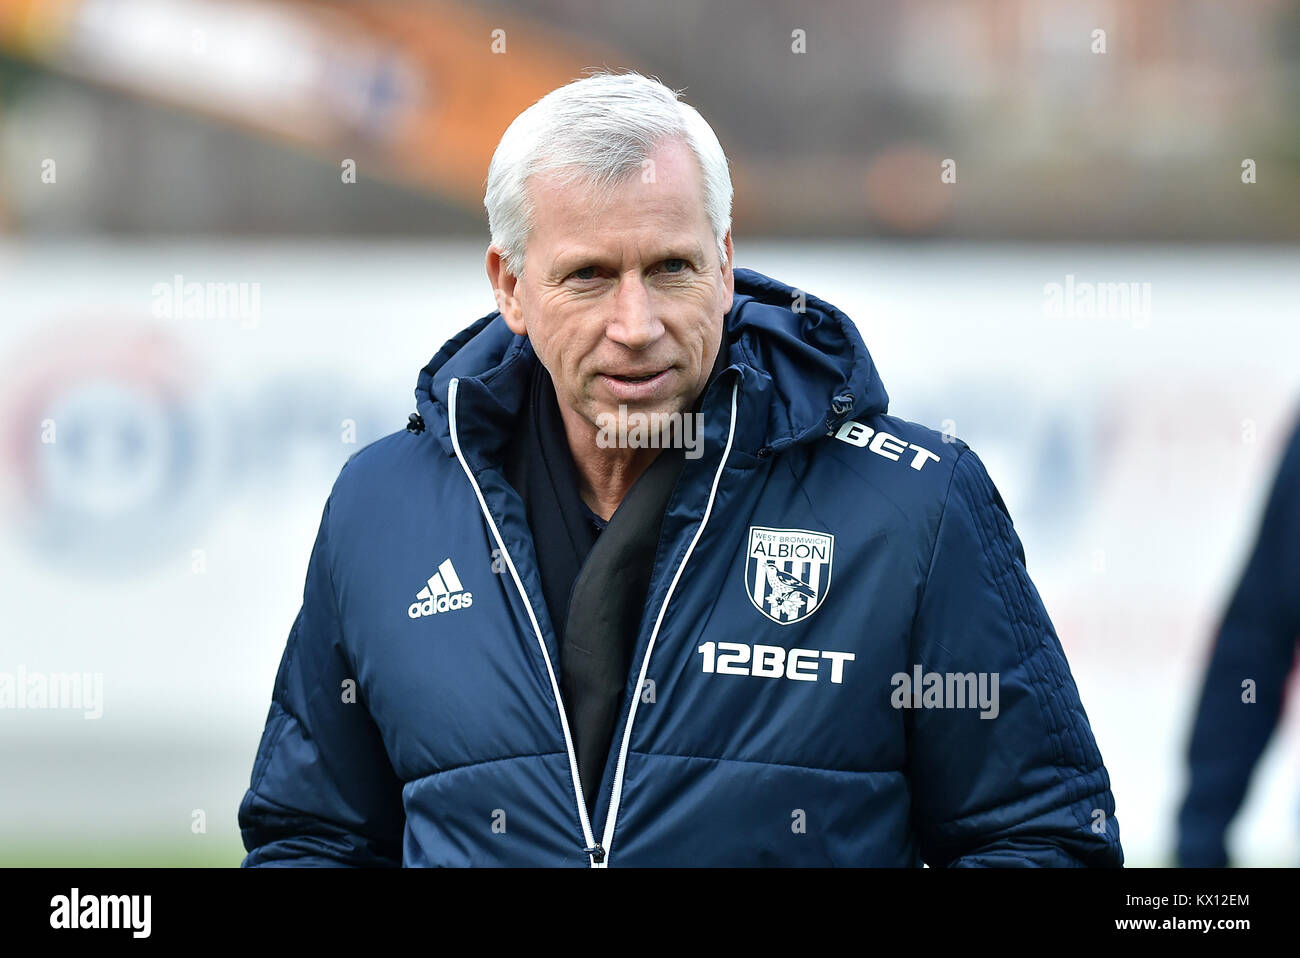 West Bromwich Albion manager Alan Pardew prior to the FA Cup, third round match at St James' Park, Exeter. PRESS ASSOCIATION Photo. Picture date: Saturday January 6, 2018. See PA story SOCCER Exeter. Photo credit should read: Simon Galloway/PA Wire. RESTRICTIONS: No use with unauthorised audio, video, data, fixture lists, club/league logos or 'live' services. Online in-match use limited to 75 images, no video emulation. No use in betting, games or single club/league/player publications. Stock Photo